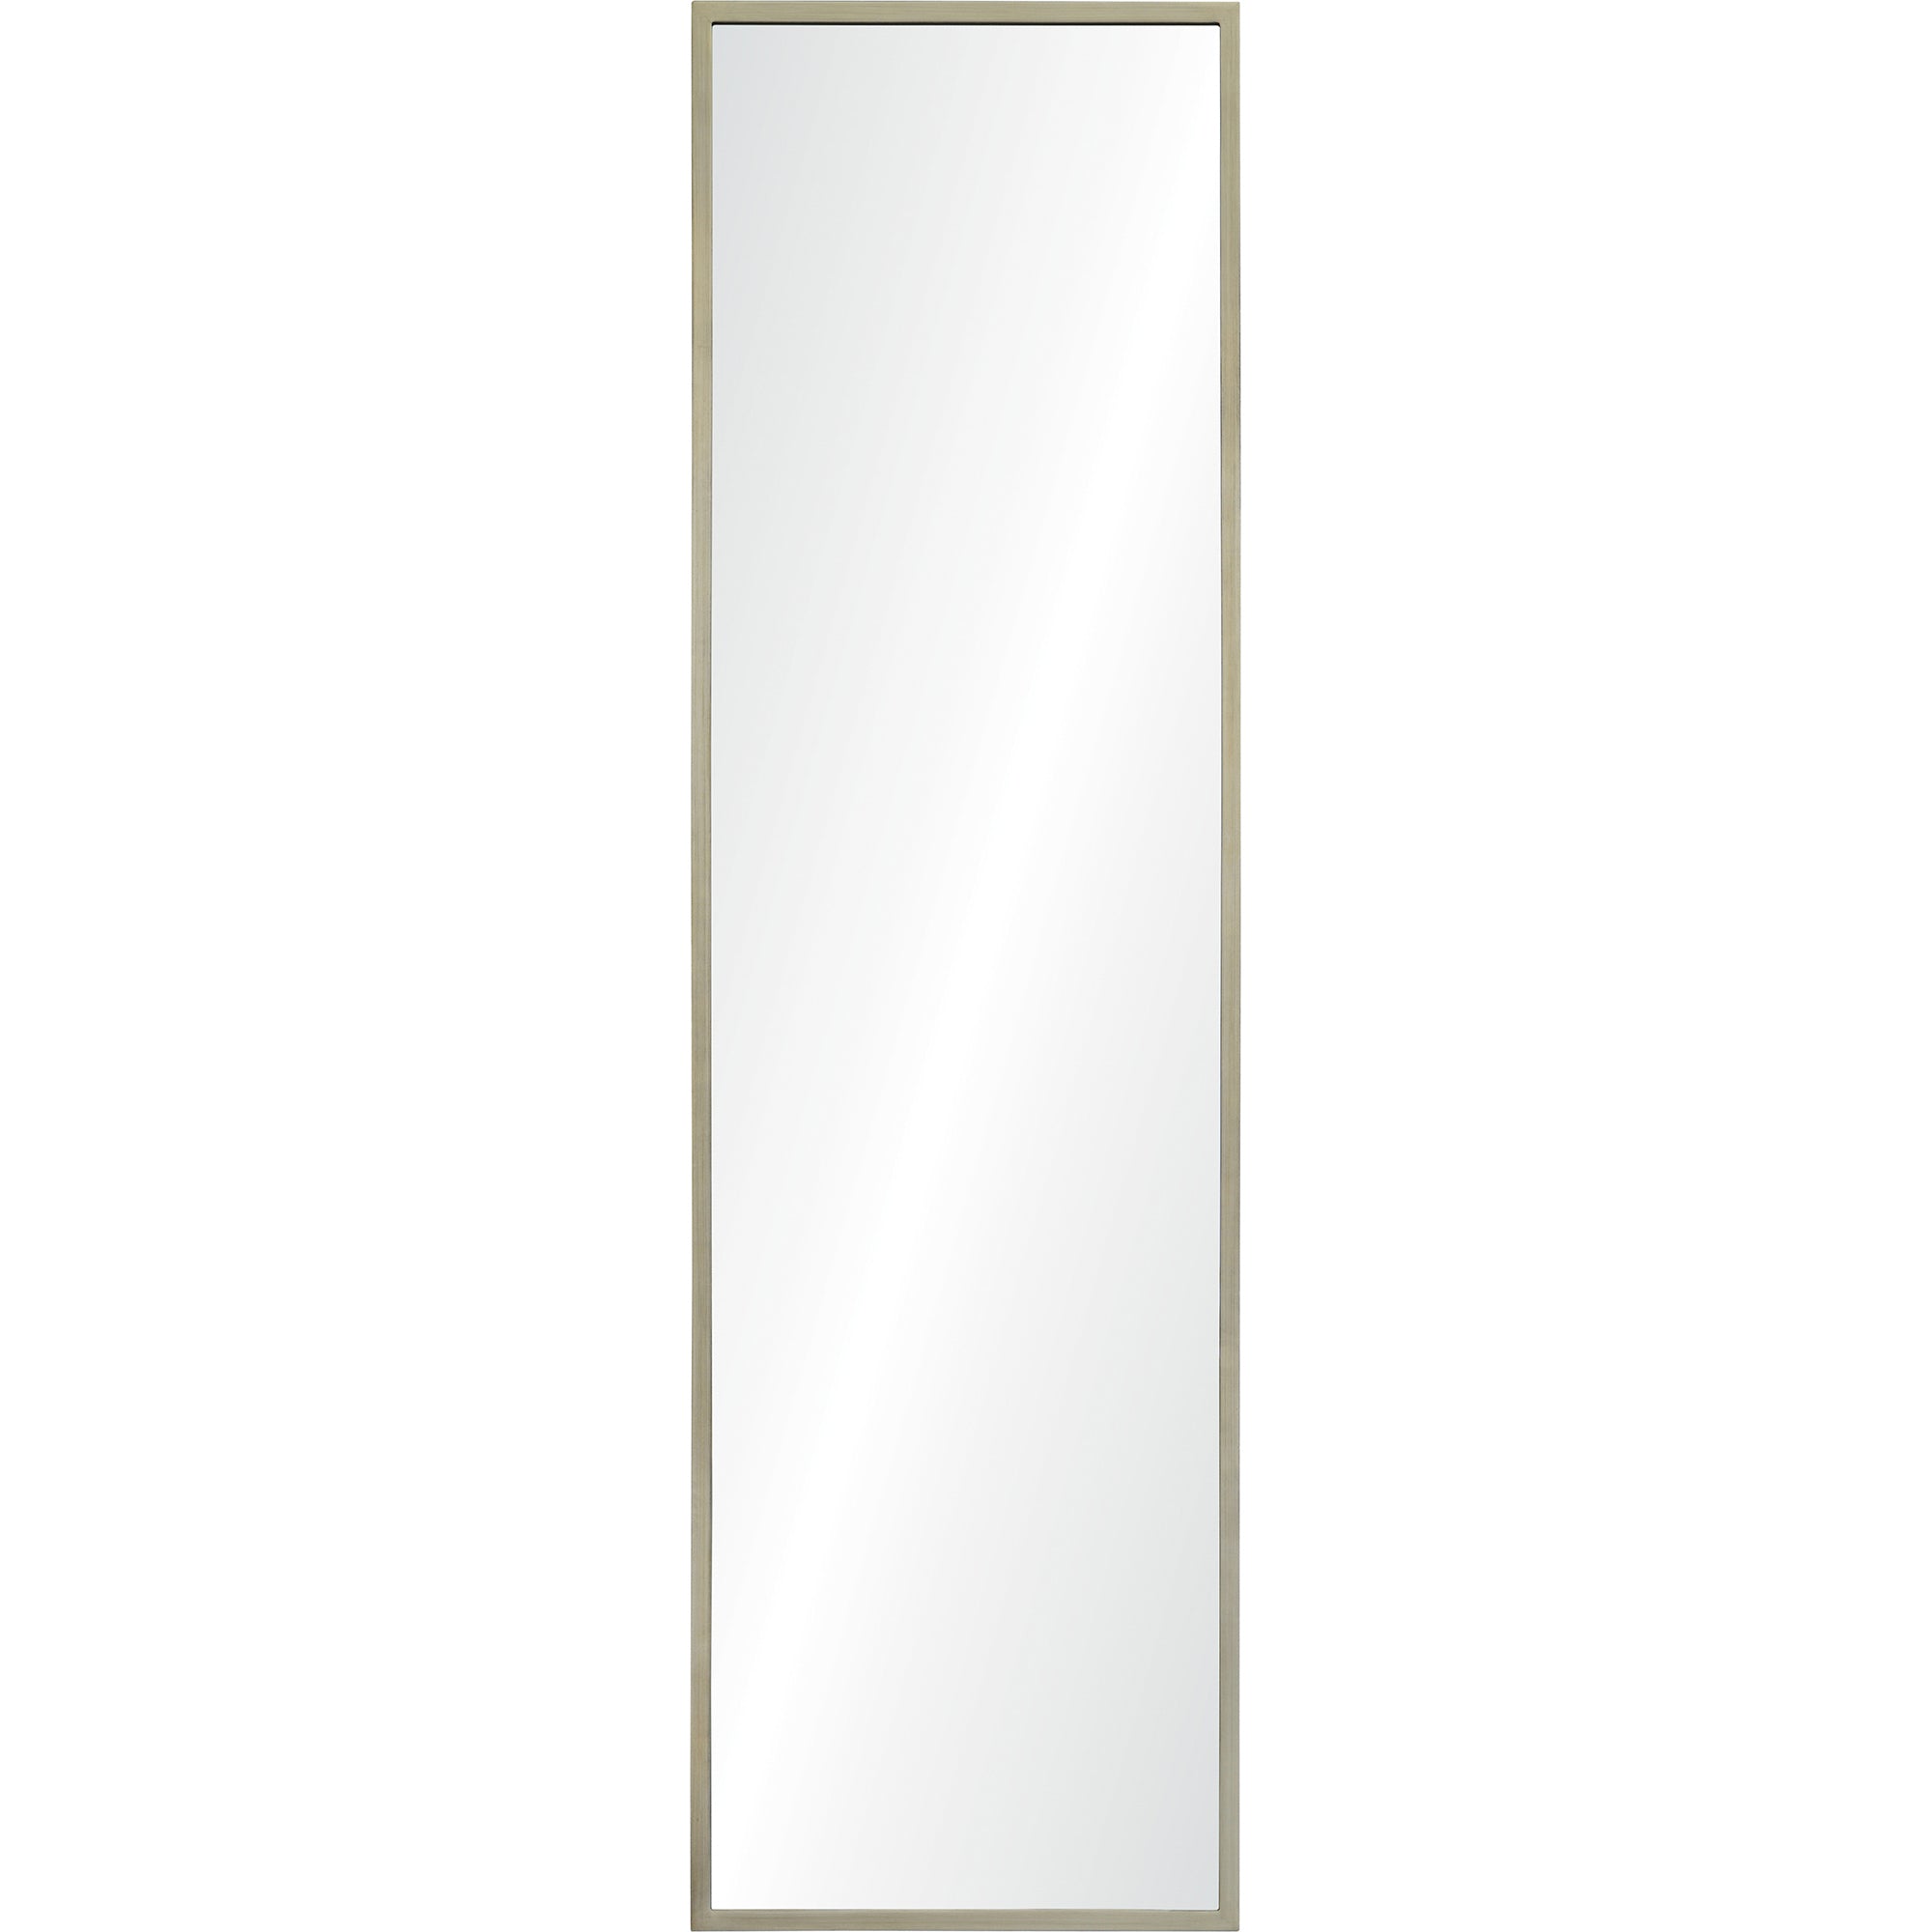 Ingrave 20" Basswood - Champagne Silver Mirror